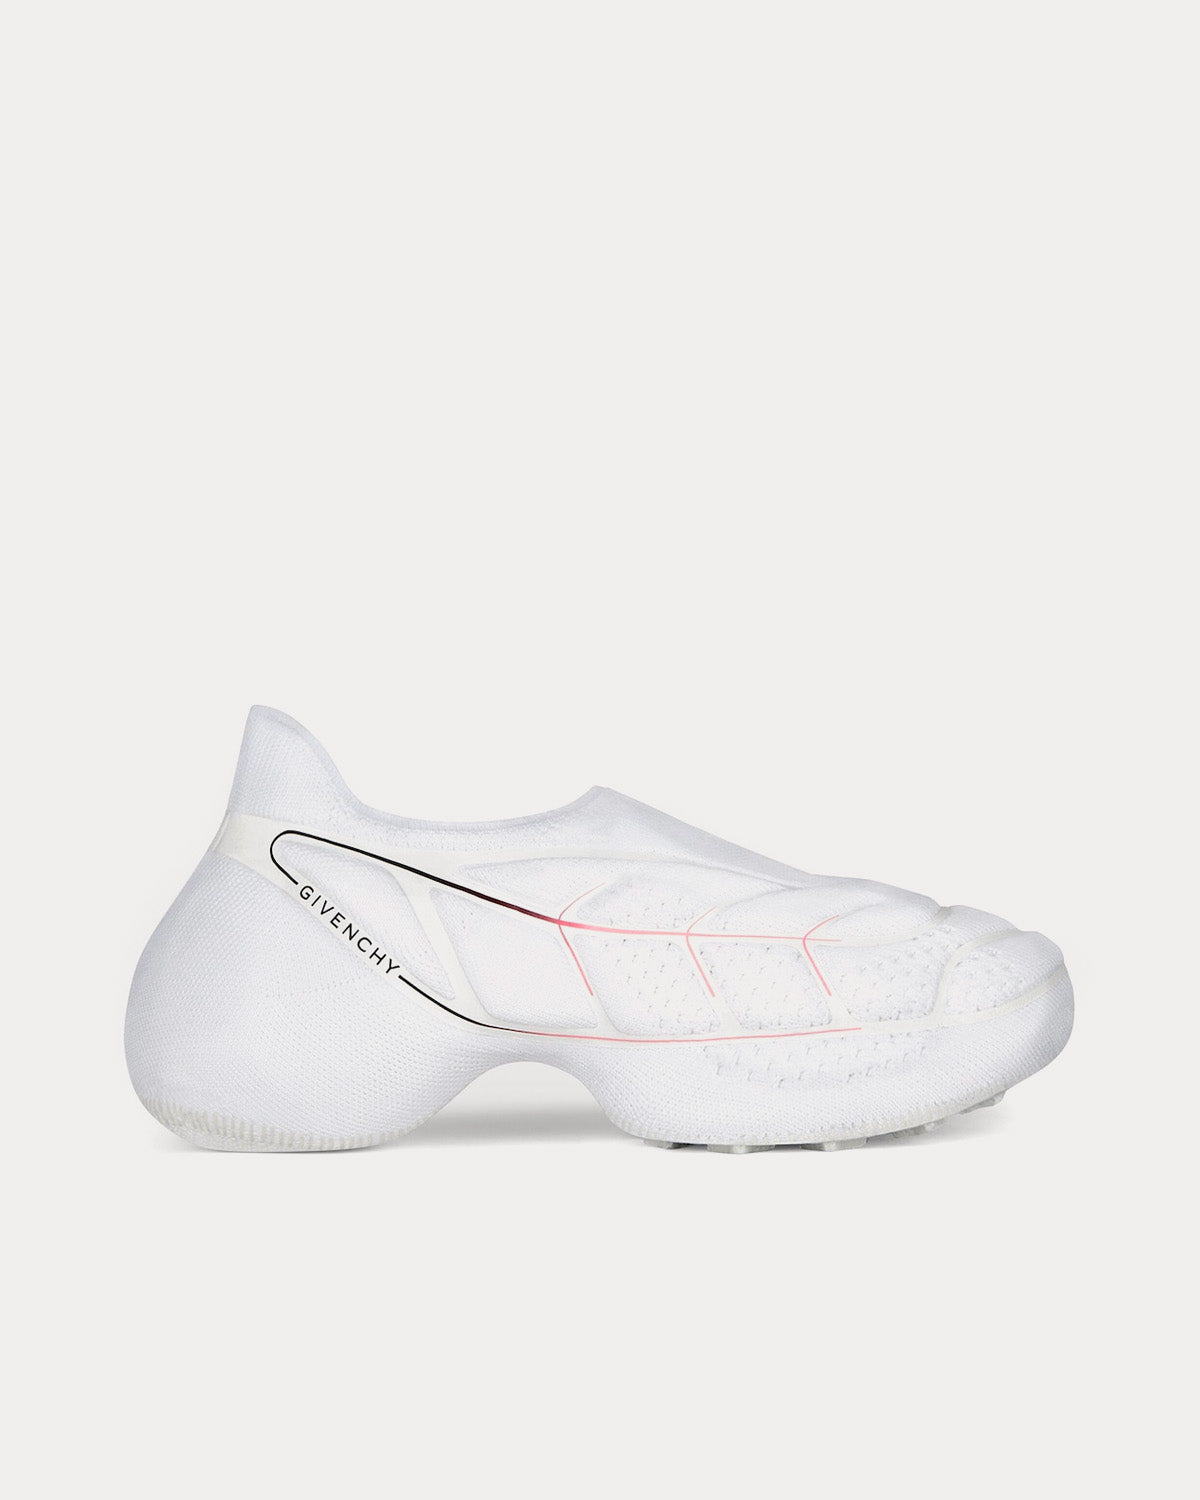 Givenchy - TK-360+ Mesh White / Pink Slip On Sneakers